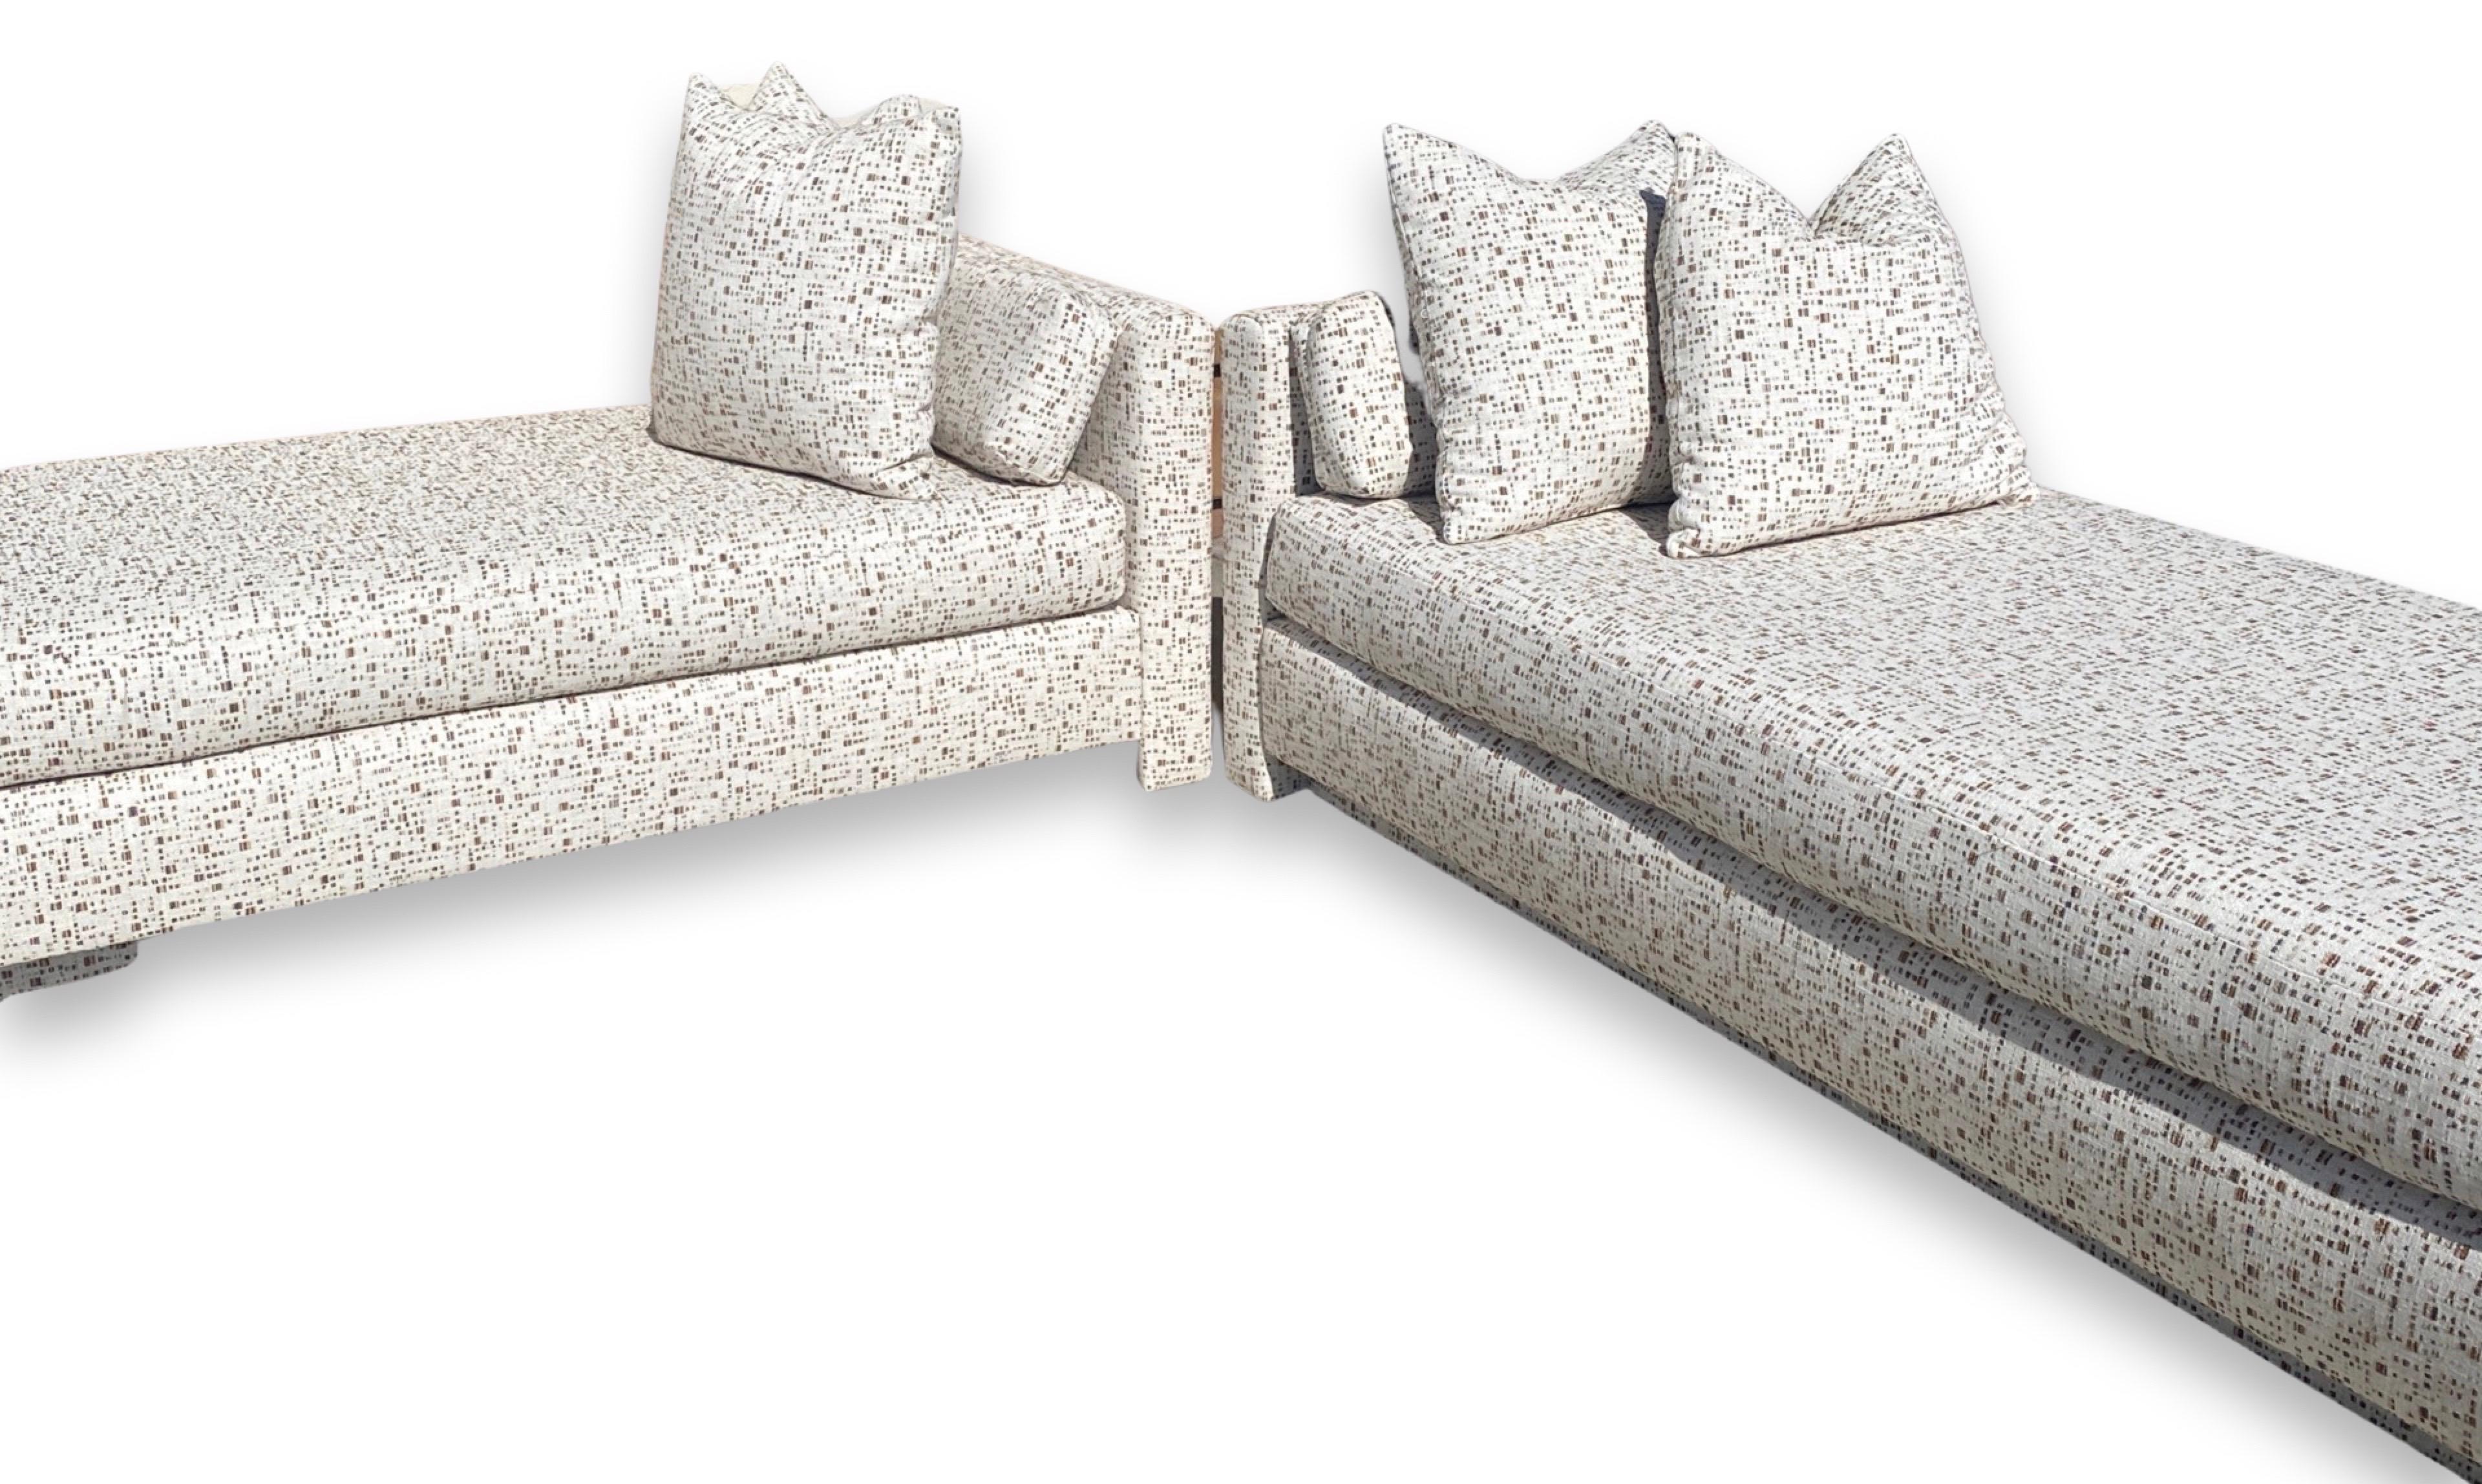 American Sofa and Chaise Set in Modern Geometric Neutral Fabric in Style of Steve Chase For Sale